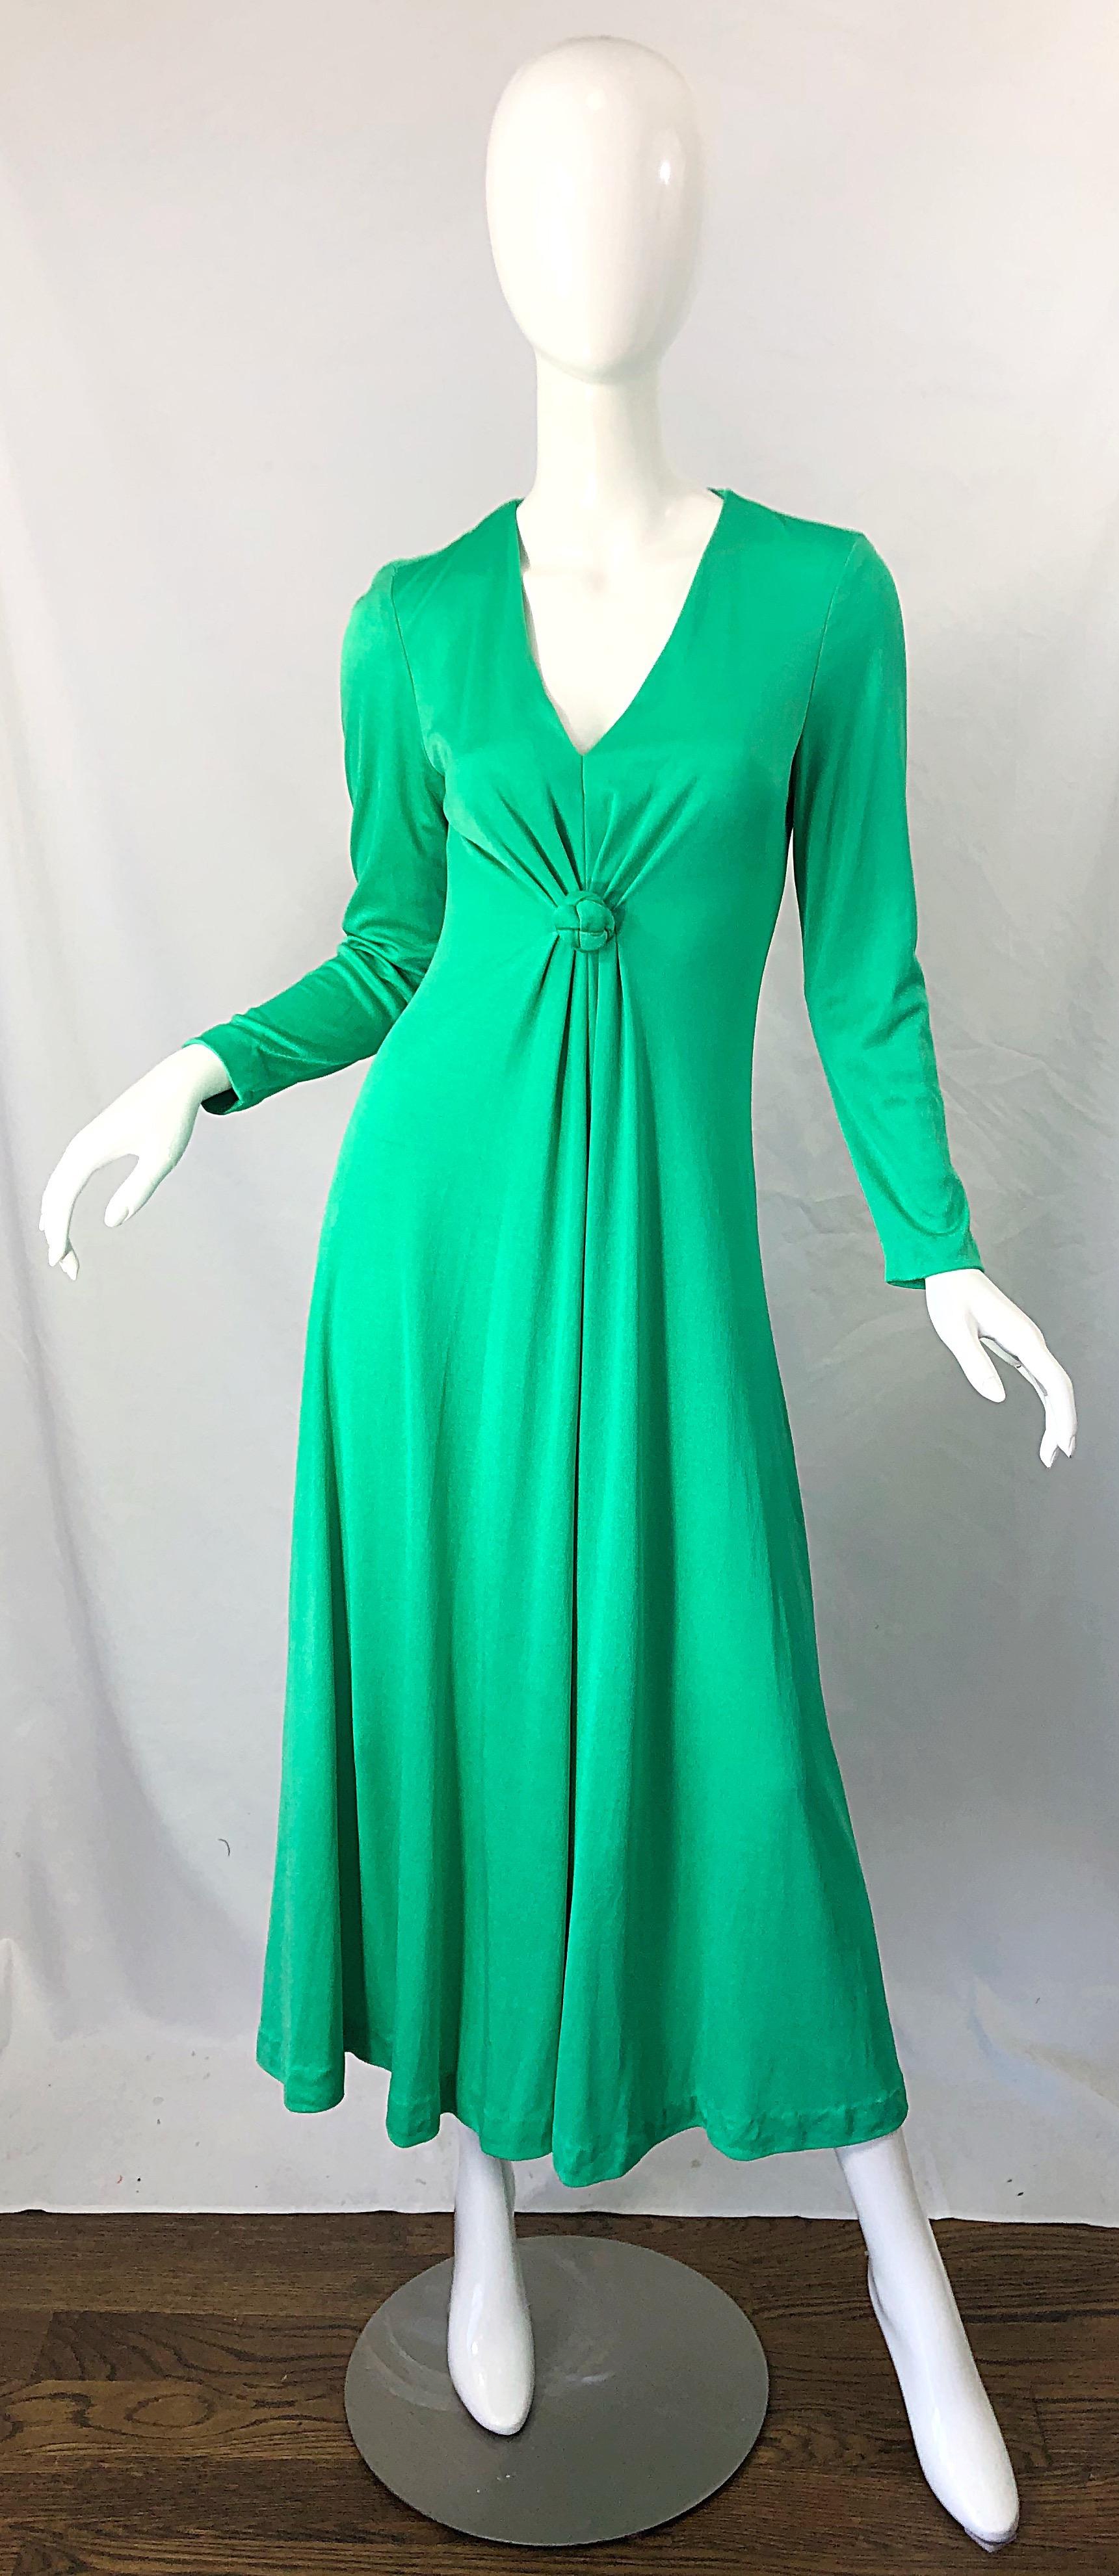 Chic 1970s FREDERICK’S OF HOLLYWOOD kelly green jersey maxi dress ! Features the perfect green color that can be worn all year. Knotted applique at center chest. Hidden zipper up the back with hook-and-eye closure. Can easily be worn for day or